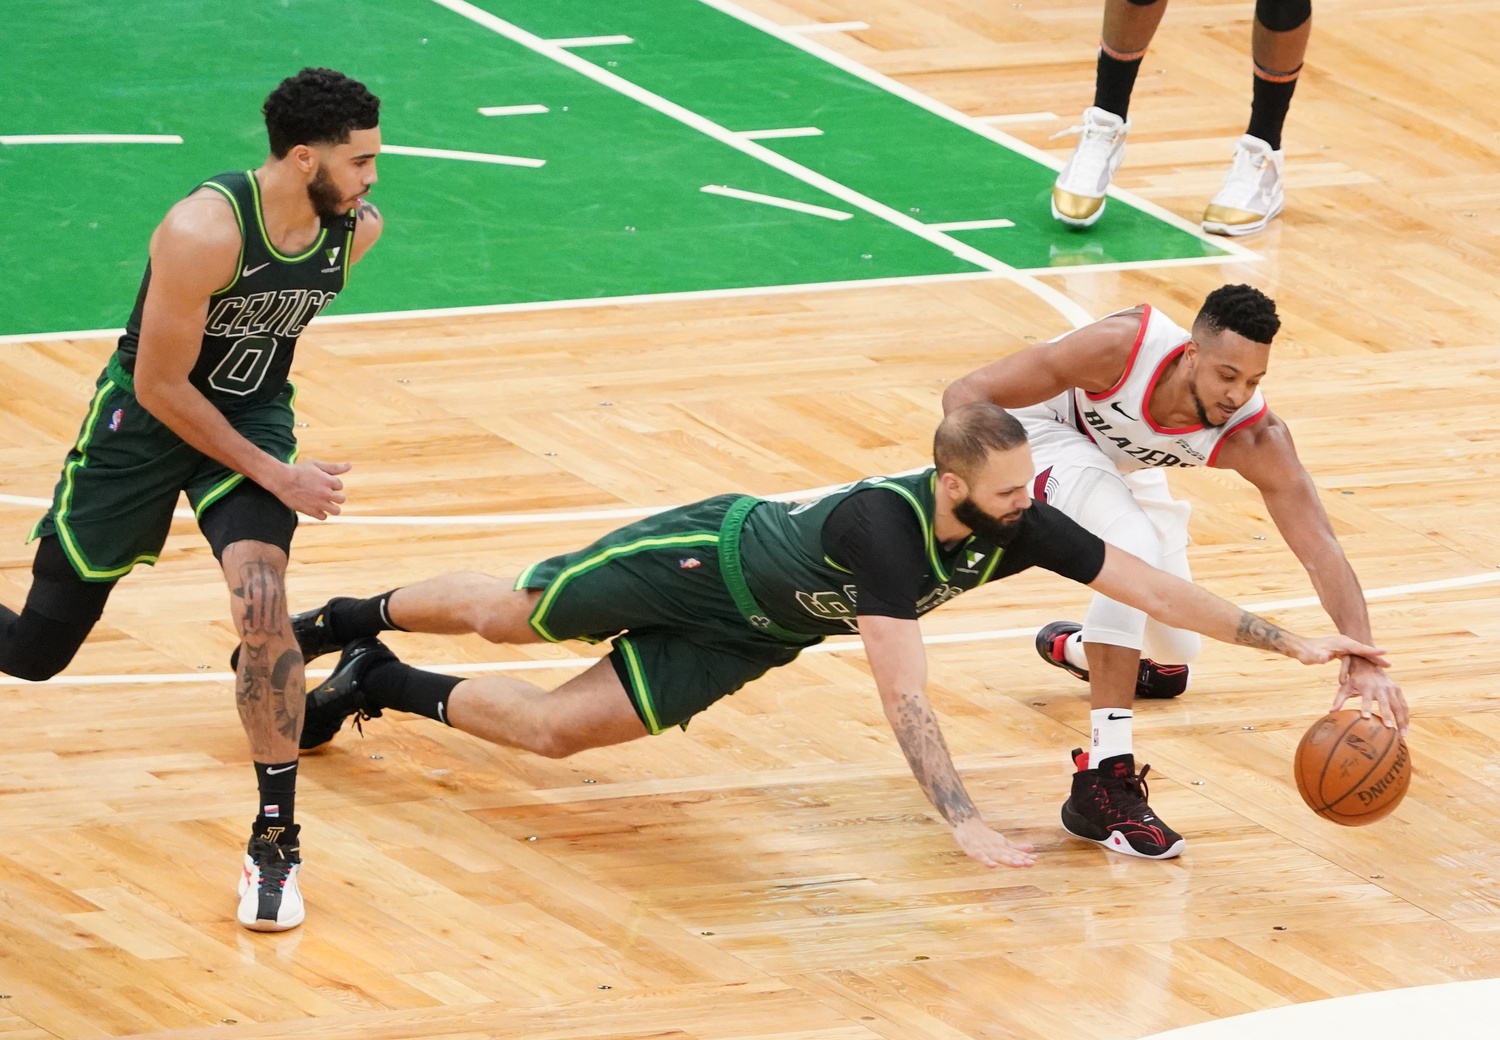 5 thoughts on a (different kind of) frustrating Celtics loss vs Portland